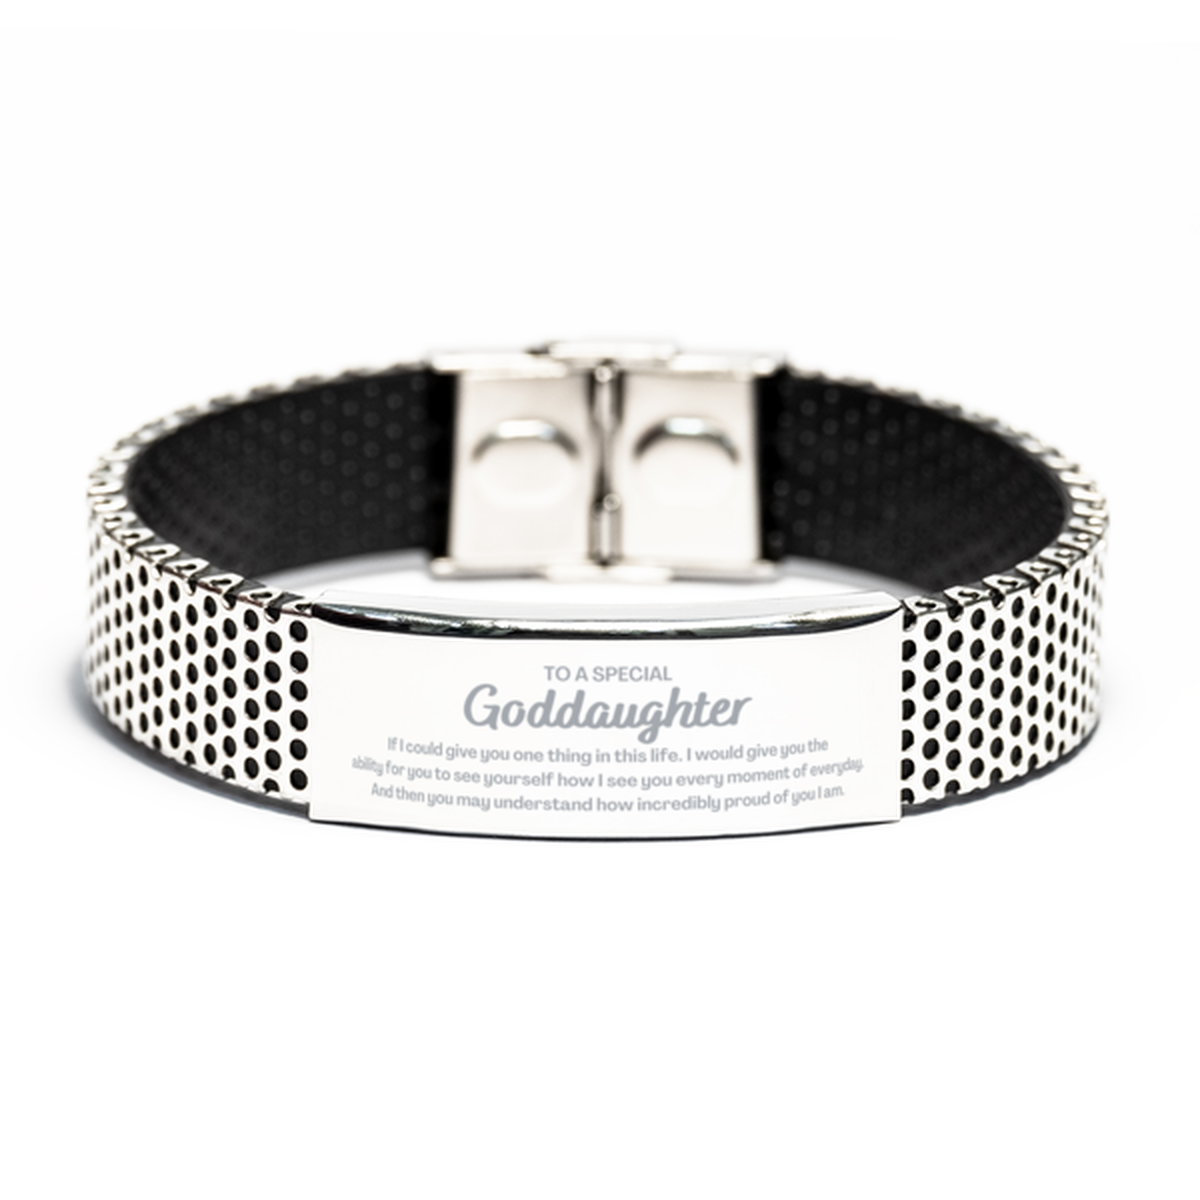 To My Goddaughter Stainless Steel Bracelet, Gifts For Goddaughter Engraved, Inspirational Gifts for Christmas Birthday, Epic Gifts for Goddaughter To A Special Goddaughter how incredibly proud of you I am